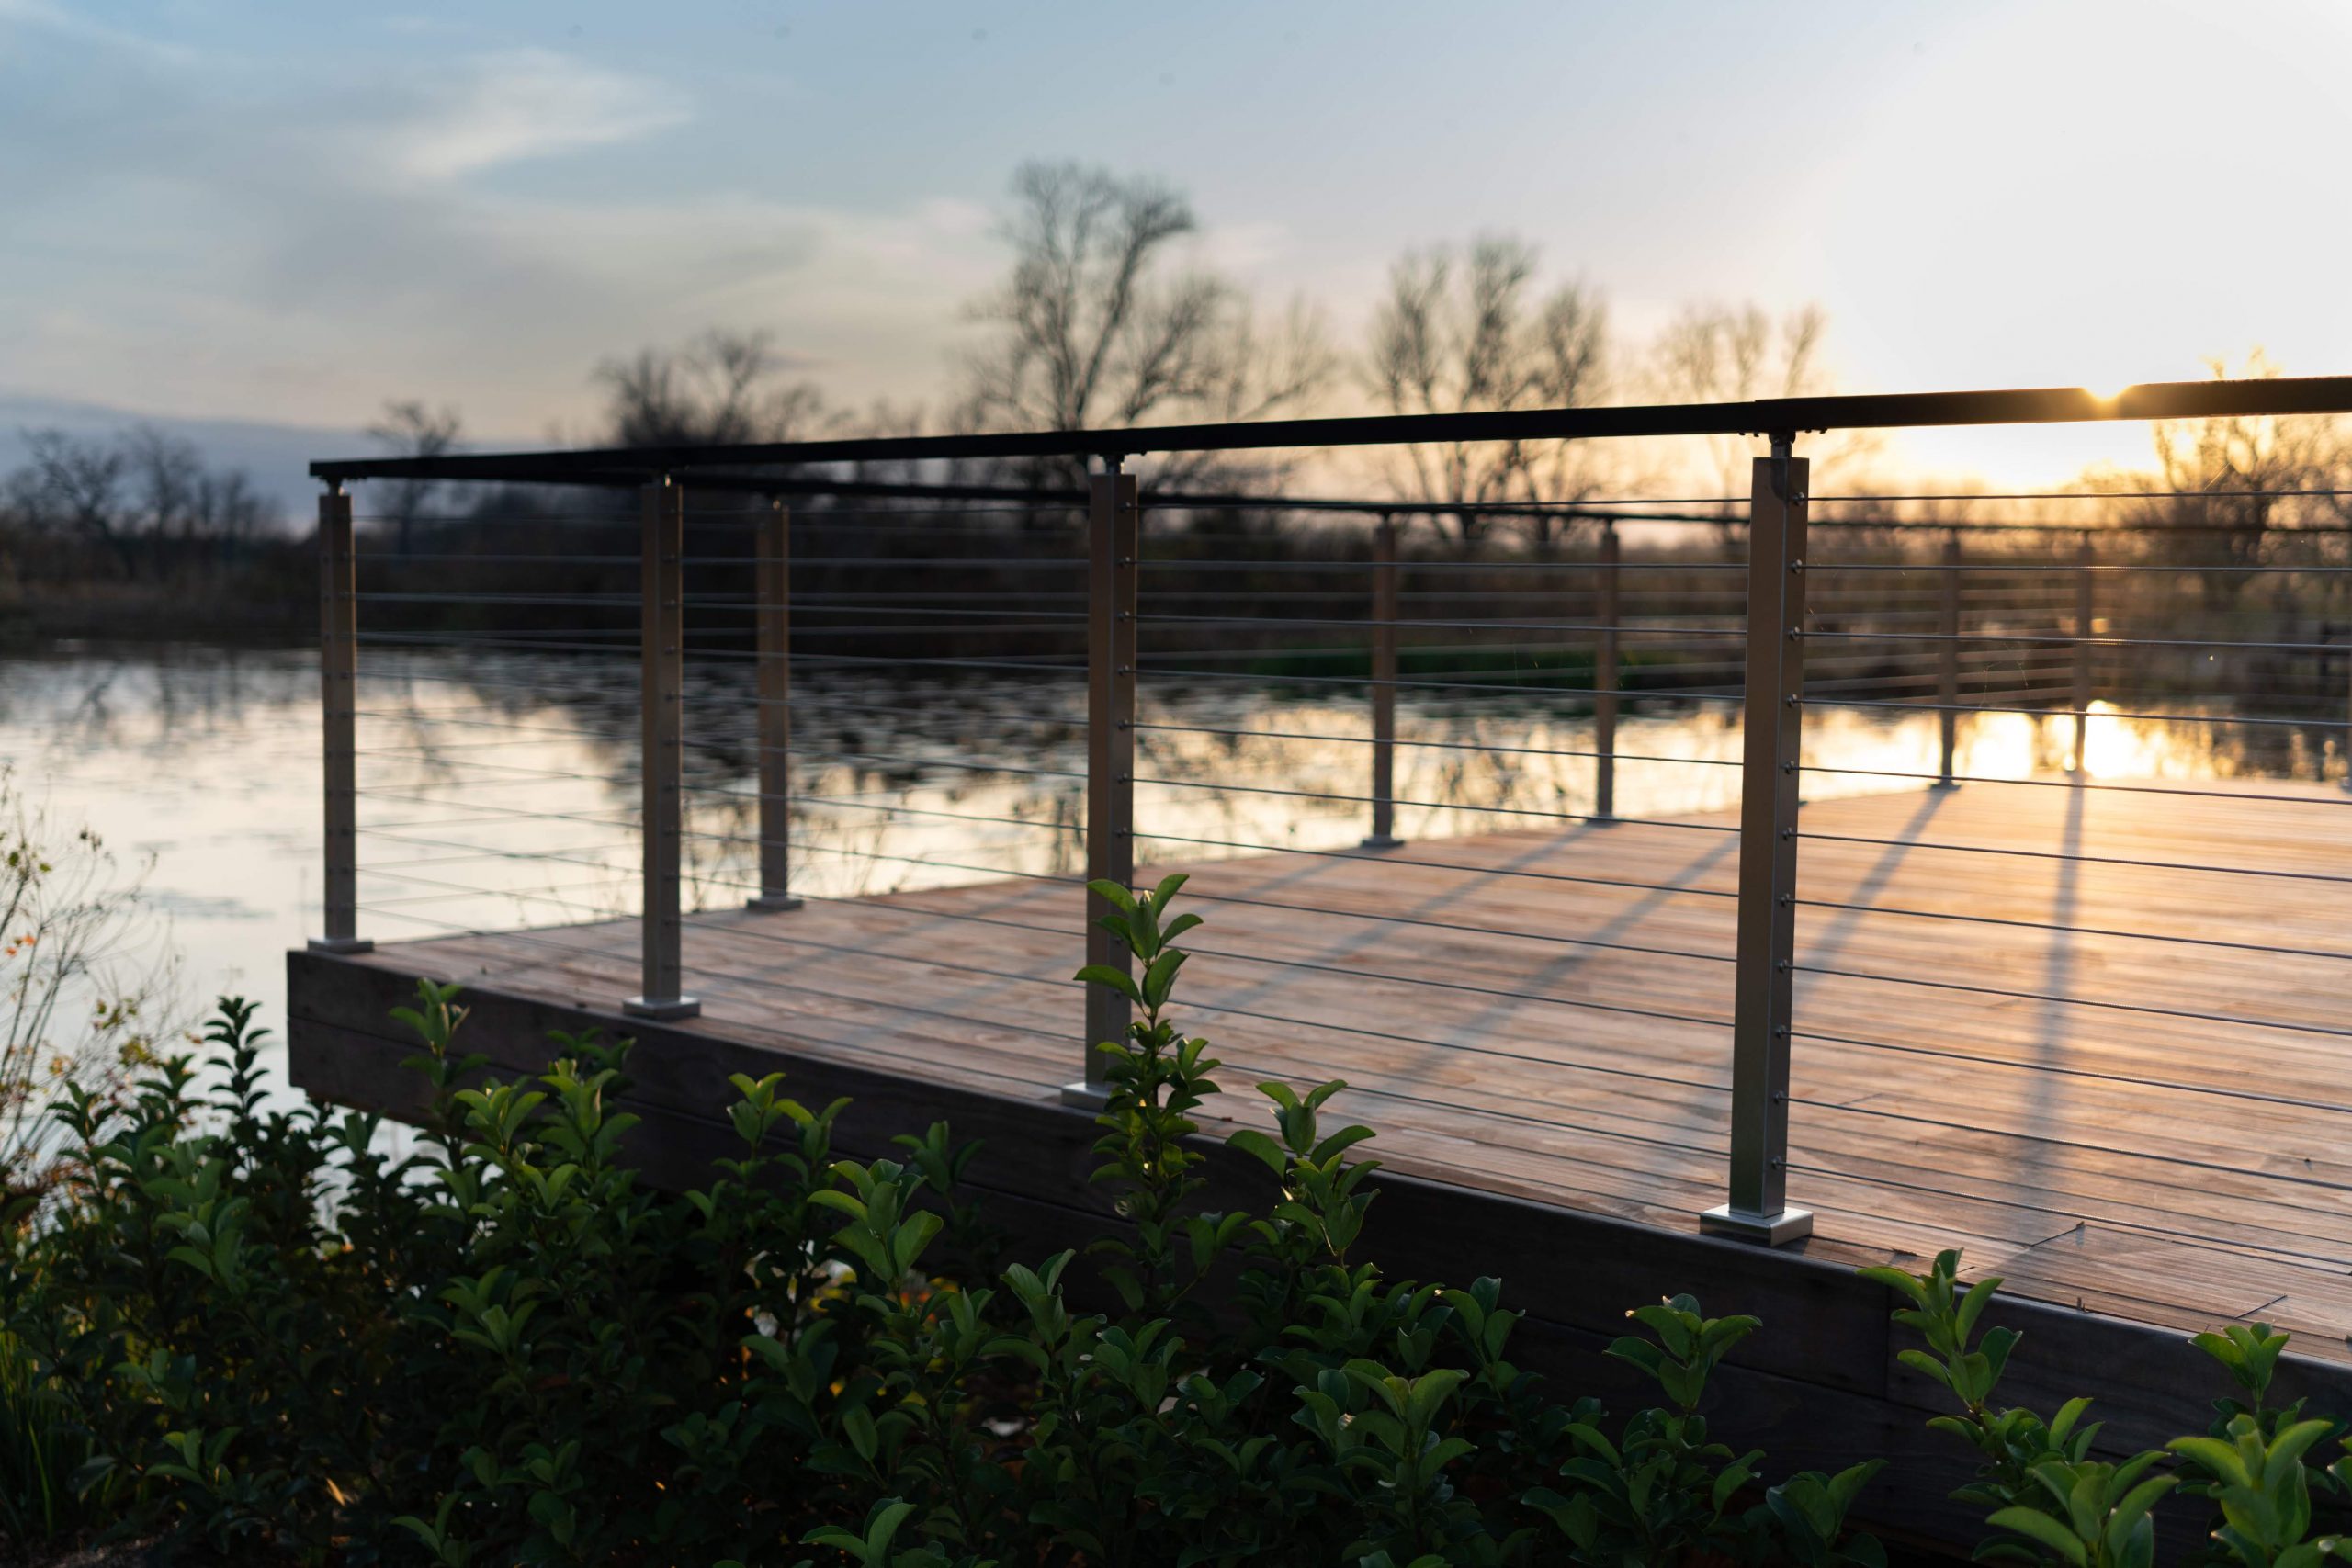 View overlooking the pond from the patio deck at the Fulshear Modern Ranch Estate featuring Kebony Modified Wood Character Decking in Fulshear, Texas during a sunset